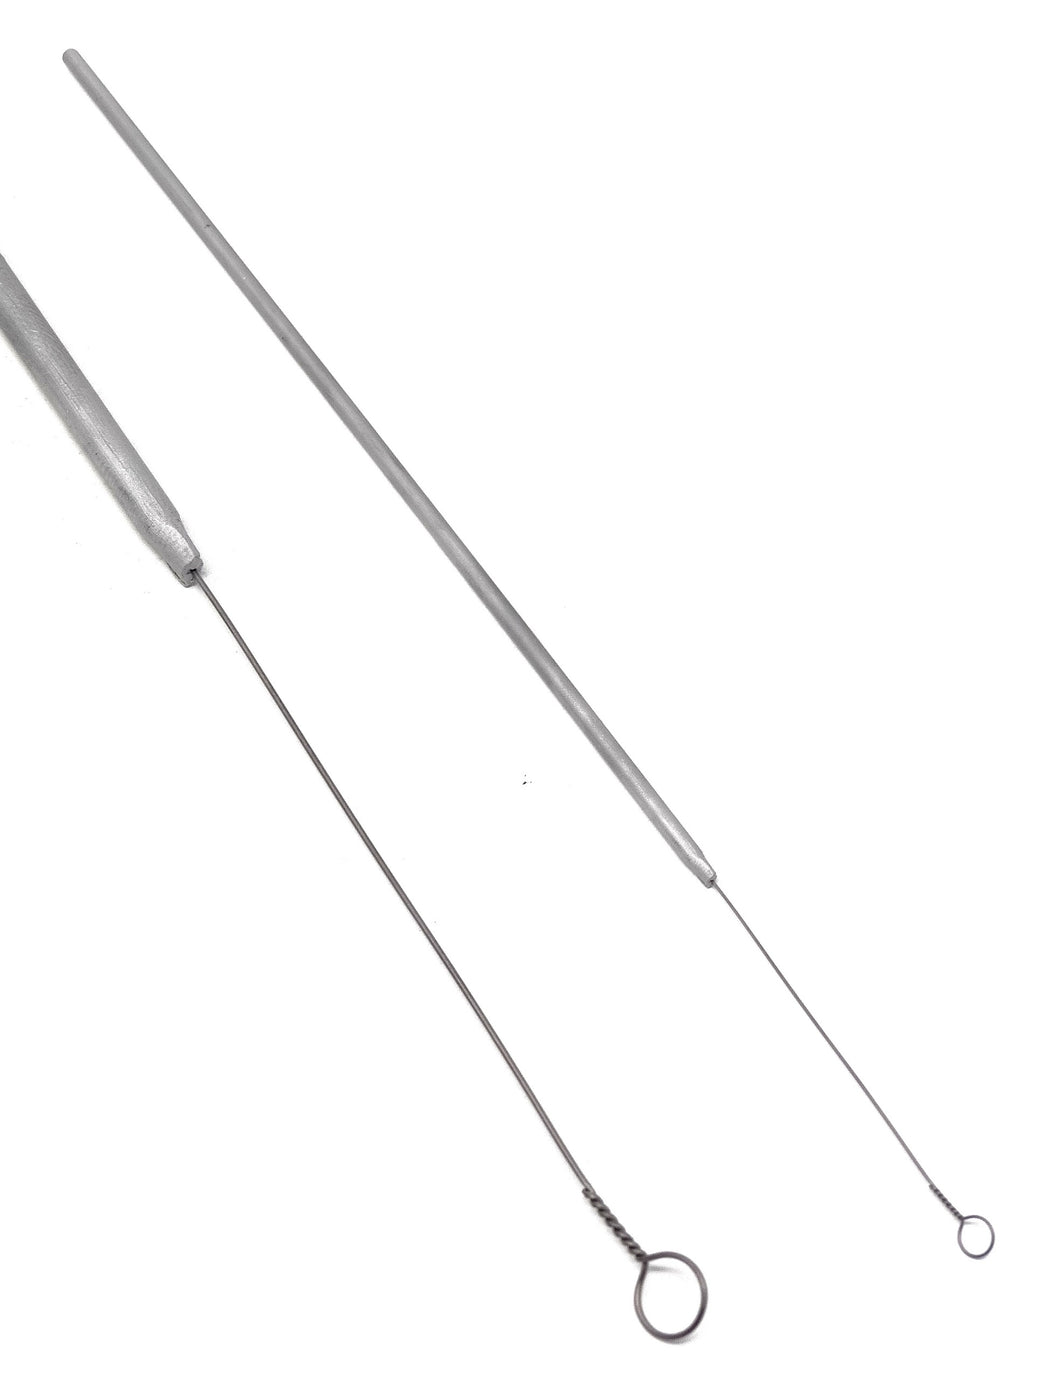 A2ZSCILAB Bacterial Inoculating Loop 5 mm, Single Nichrome Wire, With Aluminum Handle